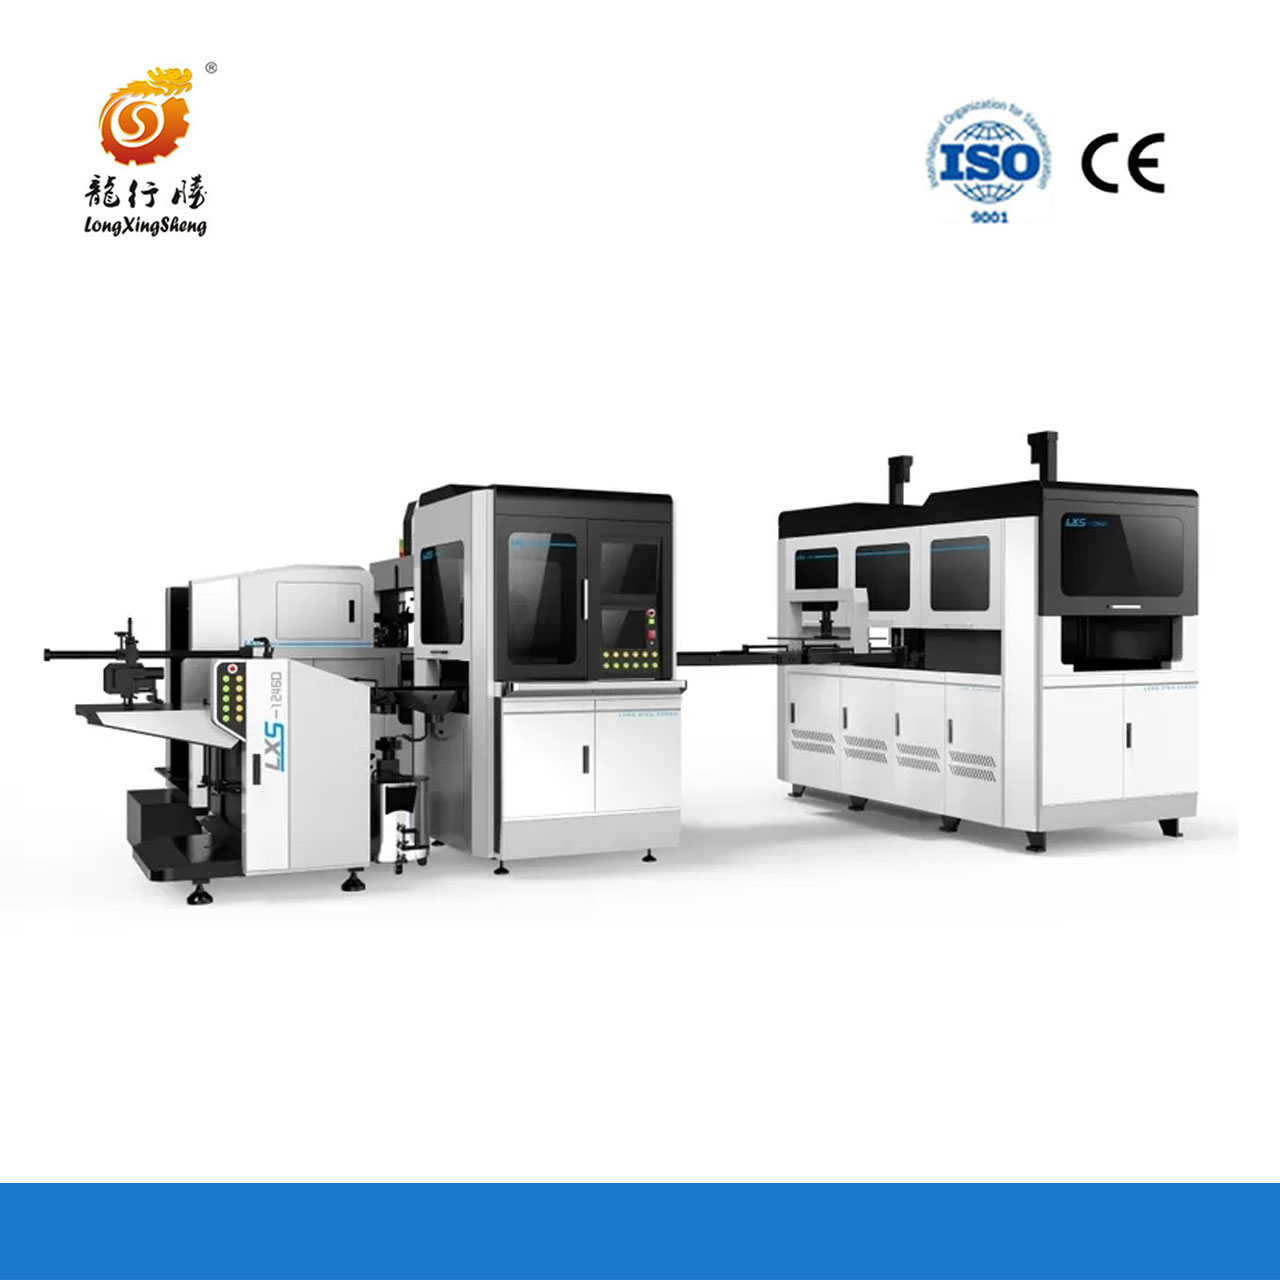 Intelligent Fully Automatic Rigid Box Packaging Machine for Pen Box